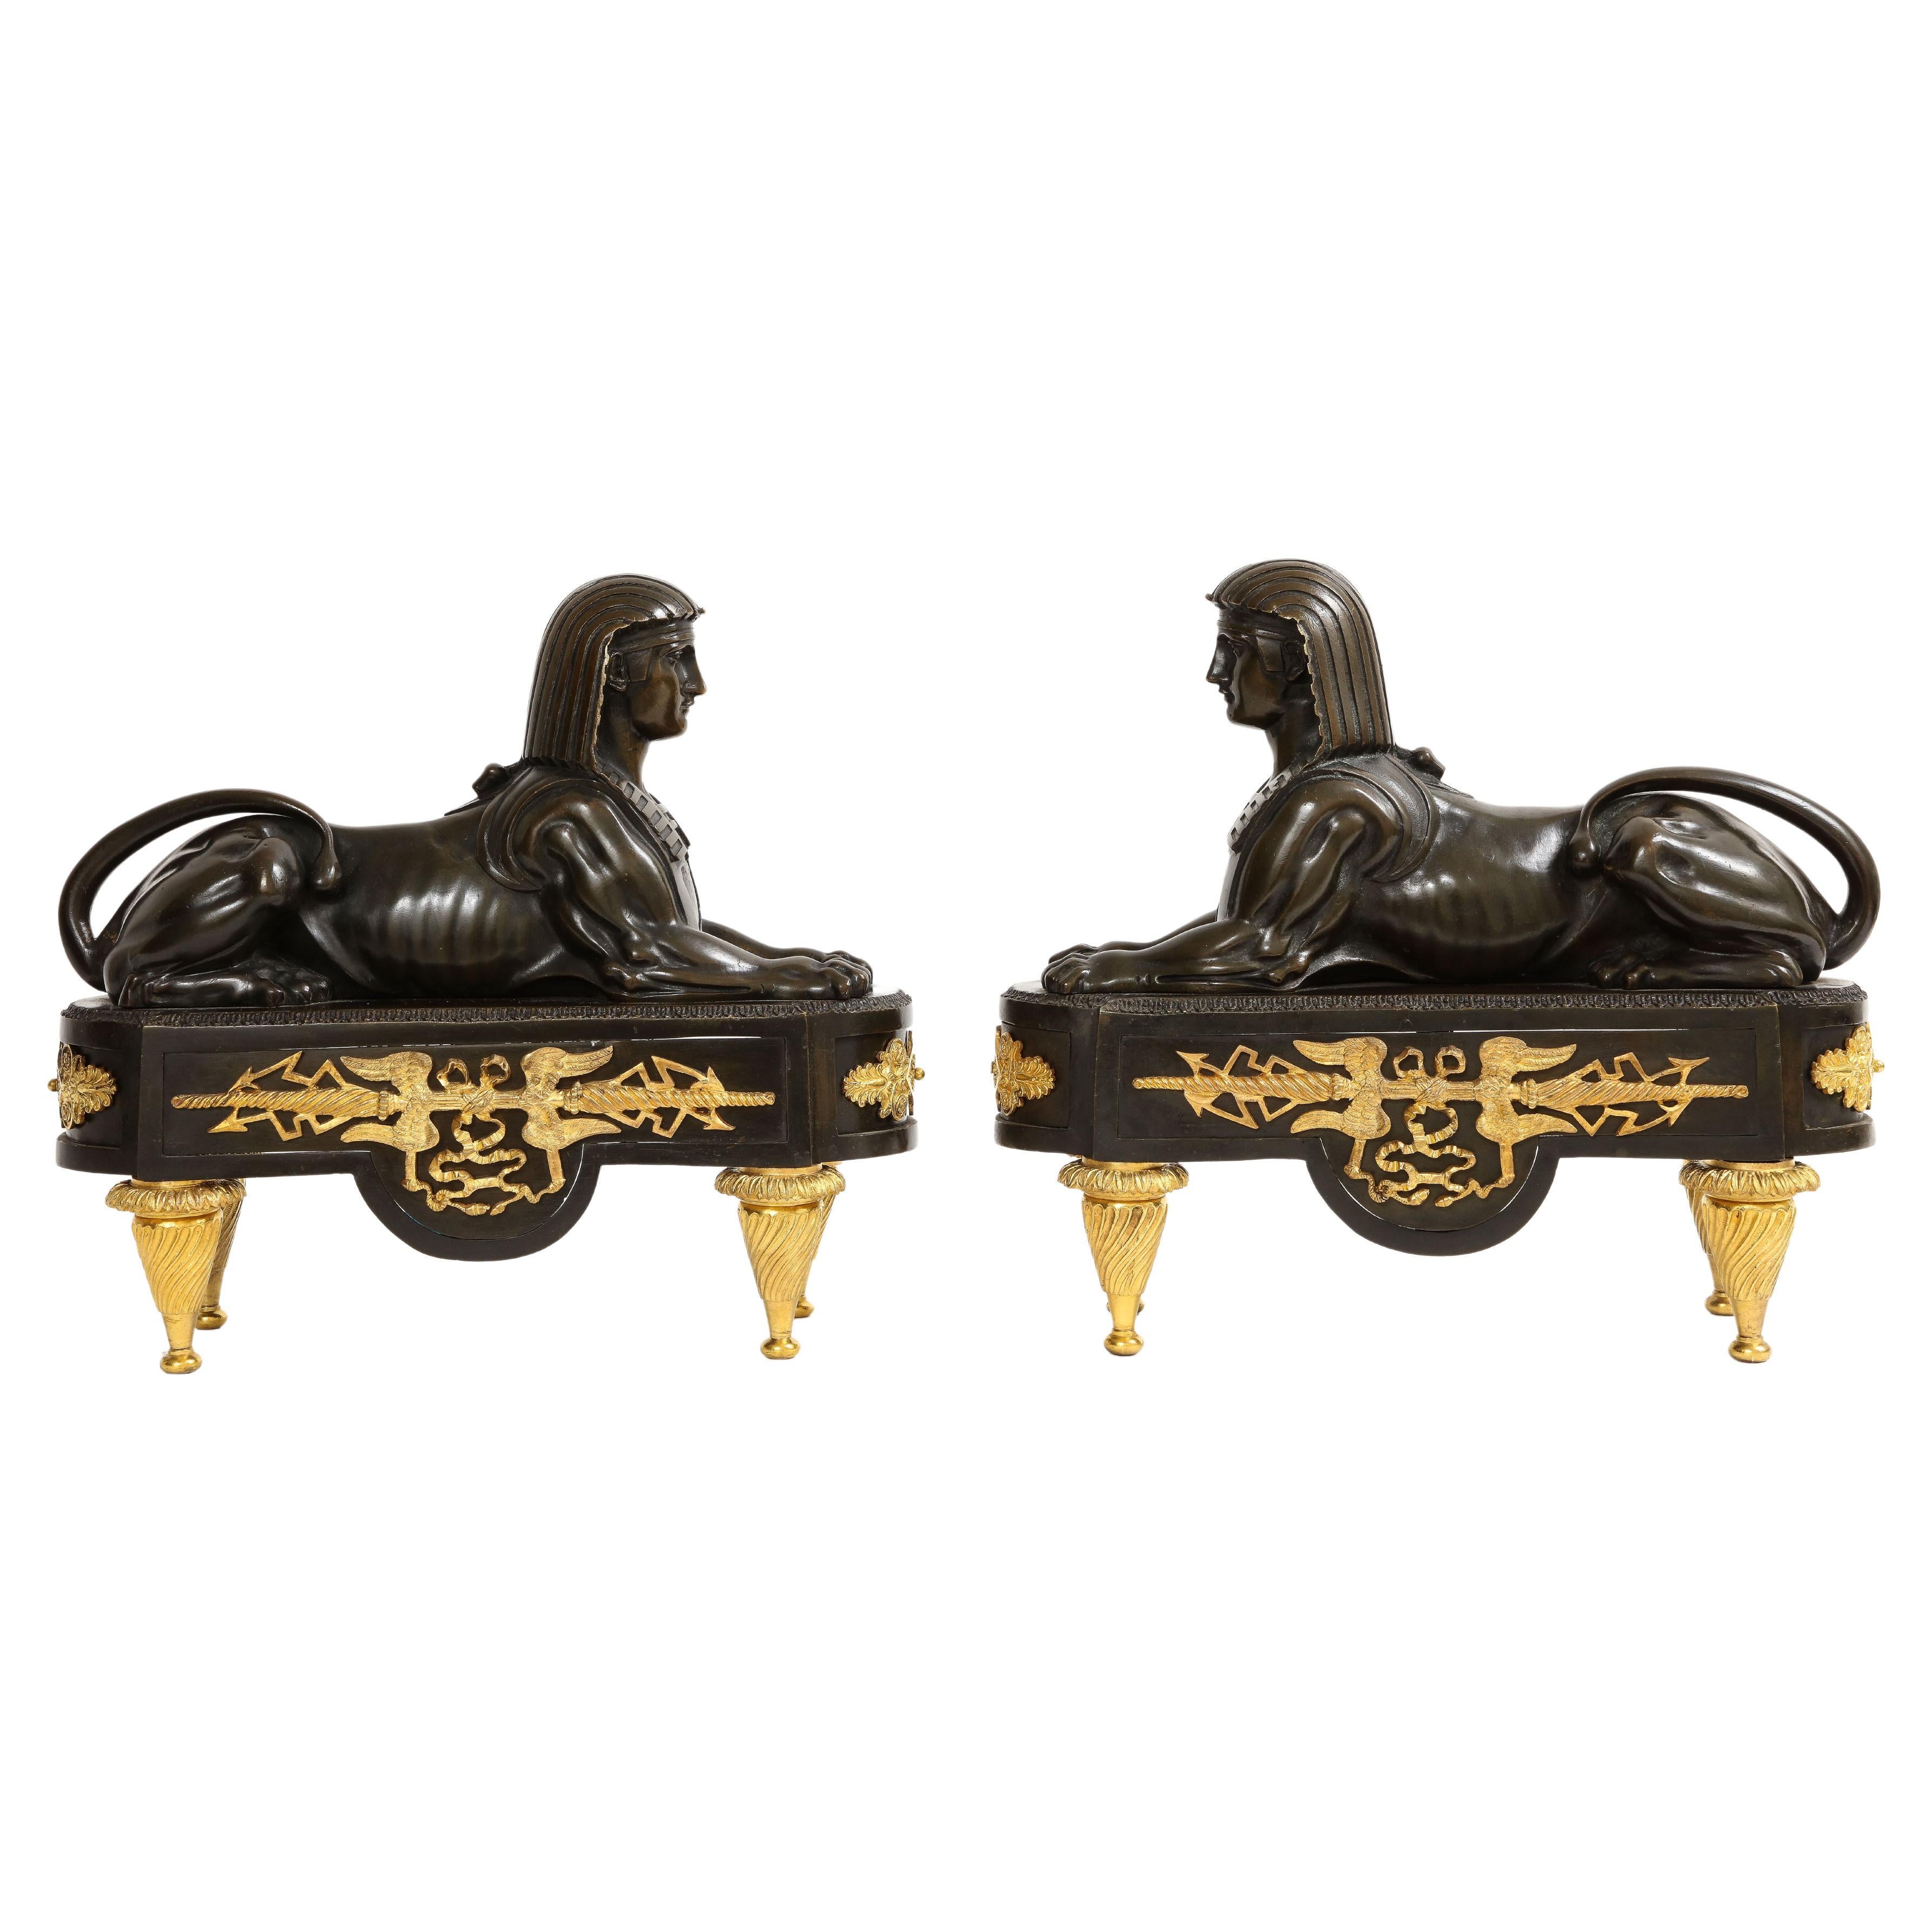 Pair of French Early 19th C. Patinated and Dore Bronze Egyptian Revival Chenets For Sale